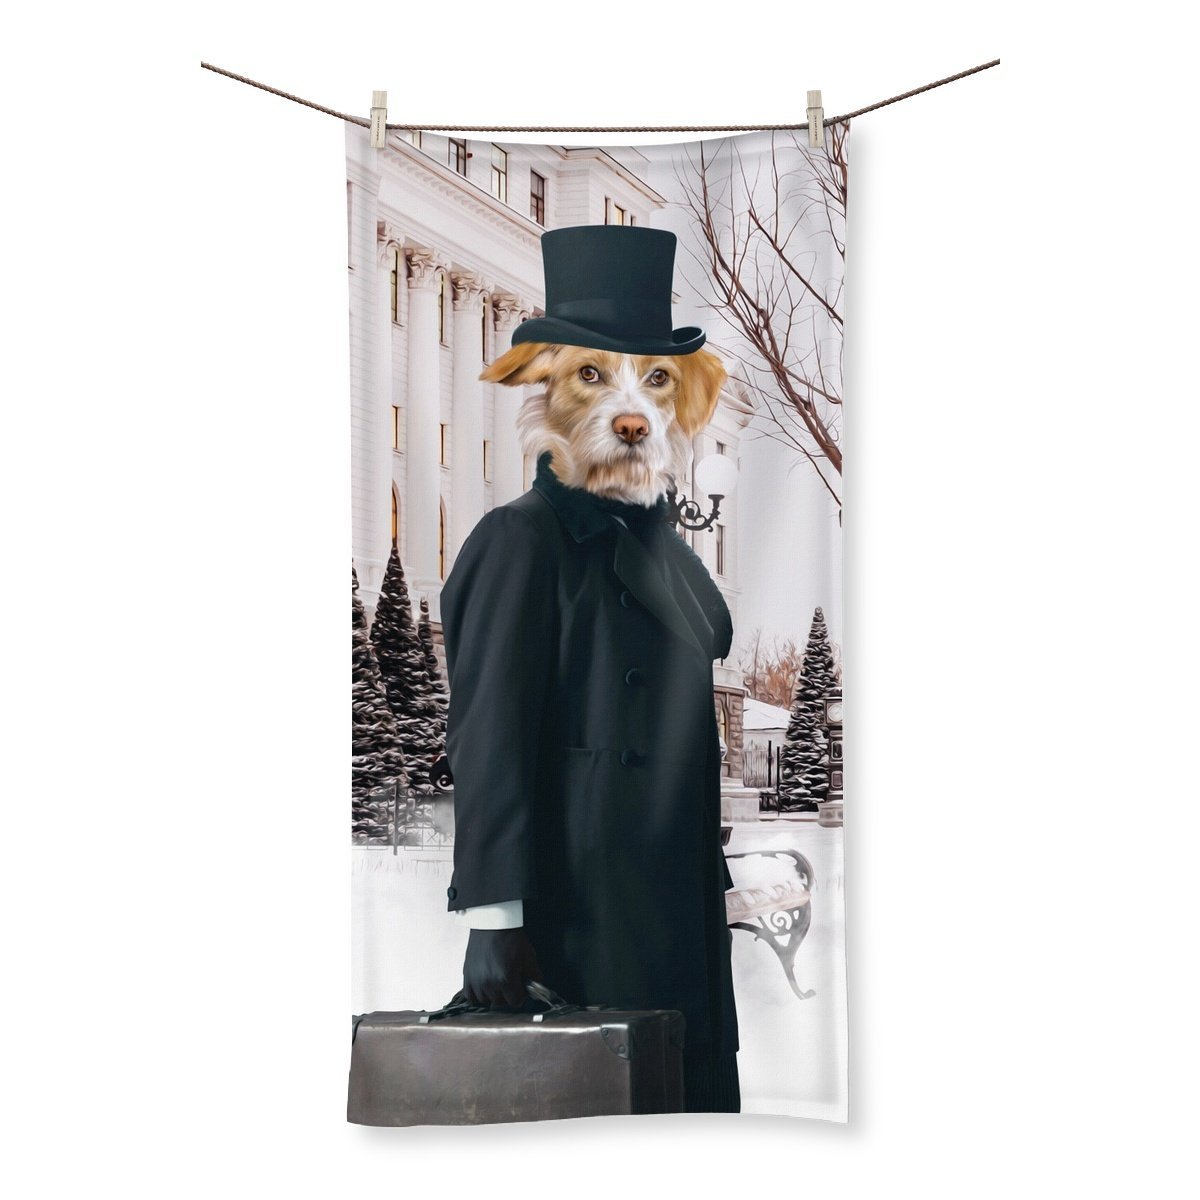 The Scrooge: Custom Pet Towel - Paw & Glory - #pet portraits# - #dog portraits# - #pet portraits uk#Paw & Glory, pawandglory, pictures for pets, paintings of pets from photos, painting pets, pet photo clothing, dog astronaut photo, aristocratic dog portraits, pet portrait,pet portraits Towel